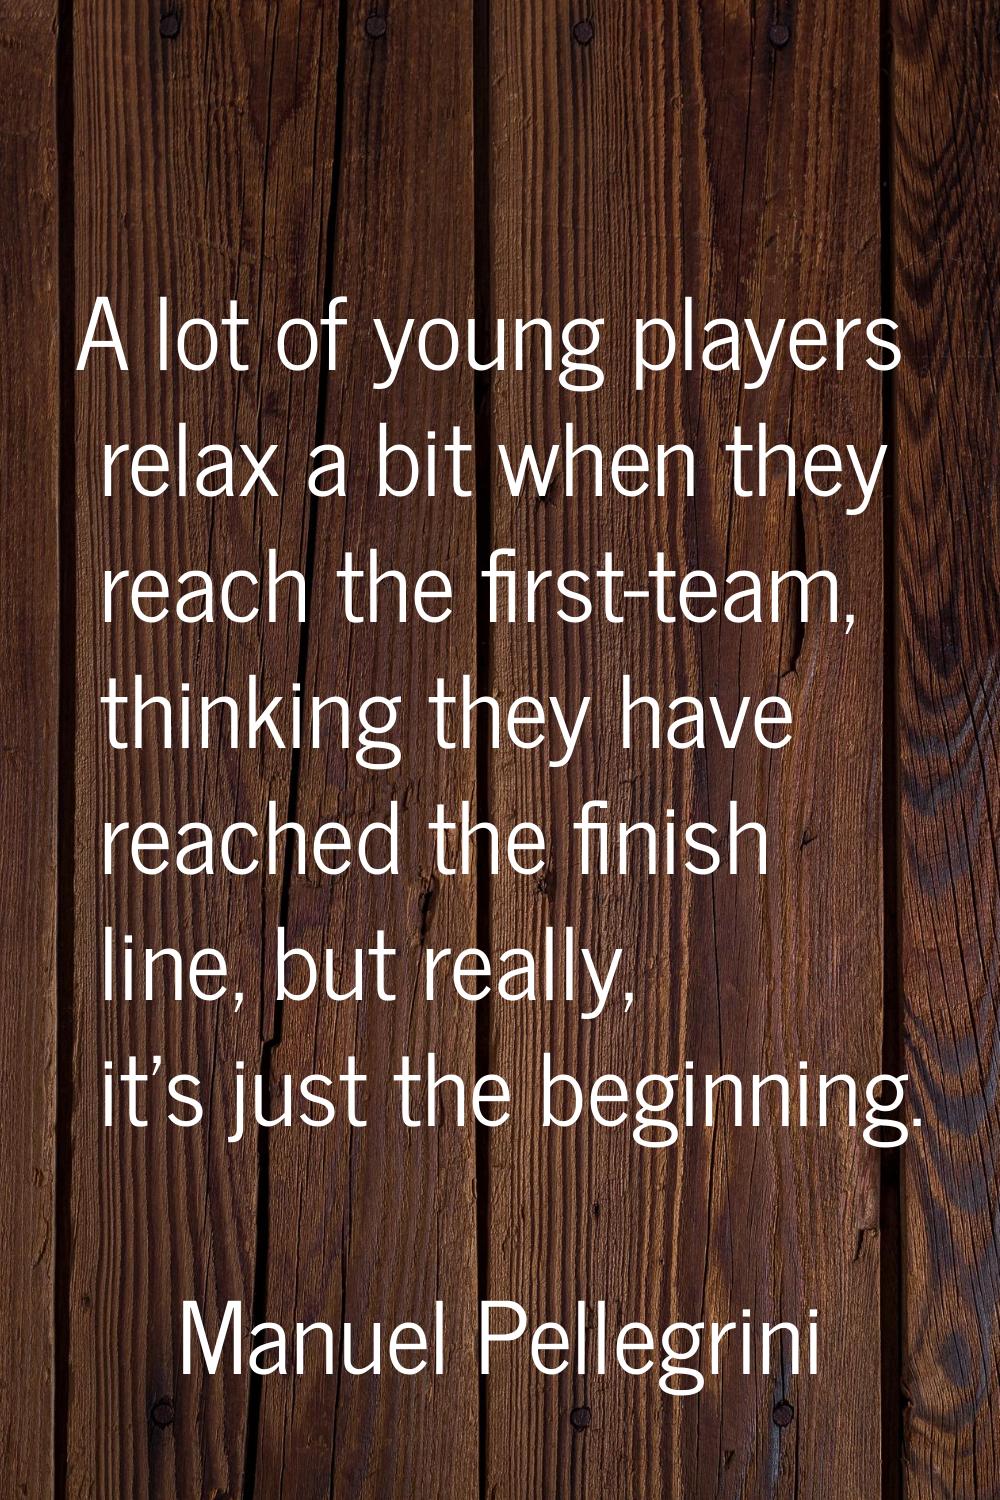 A lot of young players relax a bit when they reach the first-team, thinking they have reached the f